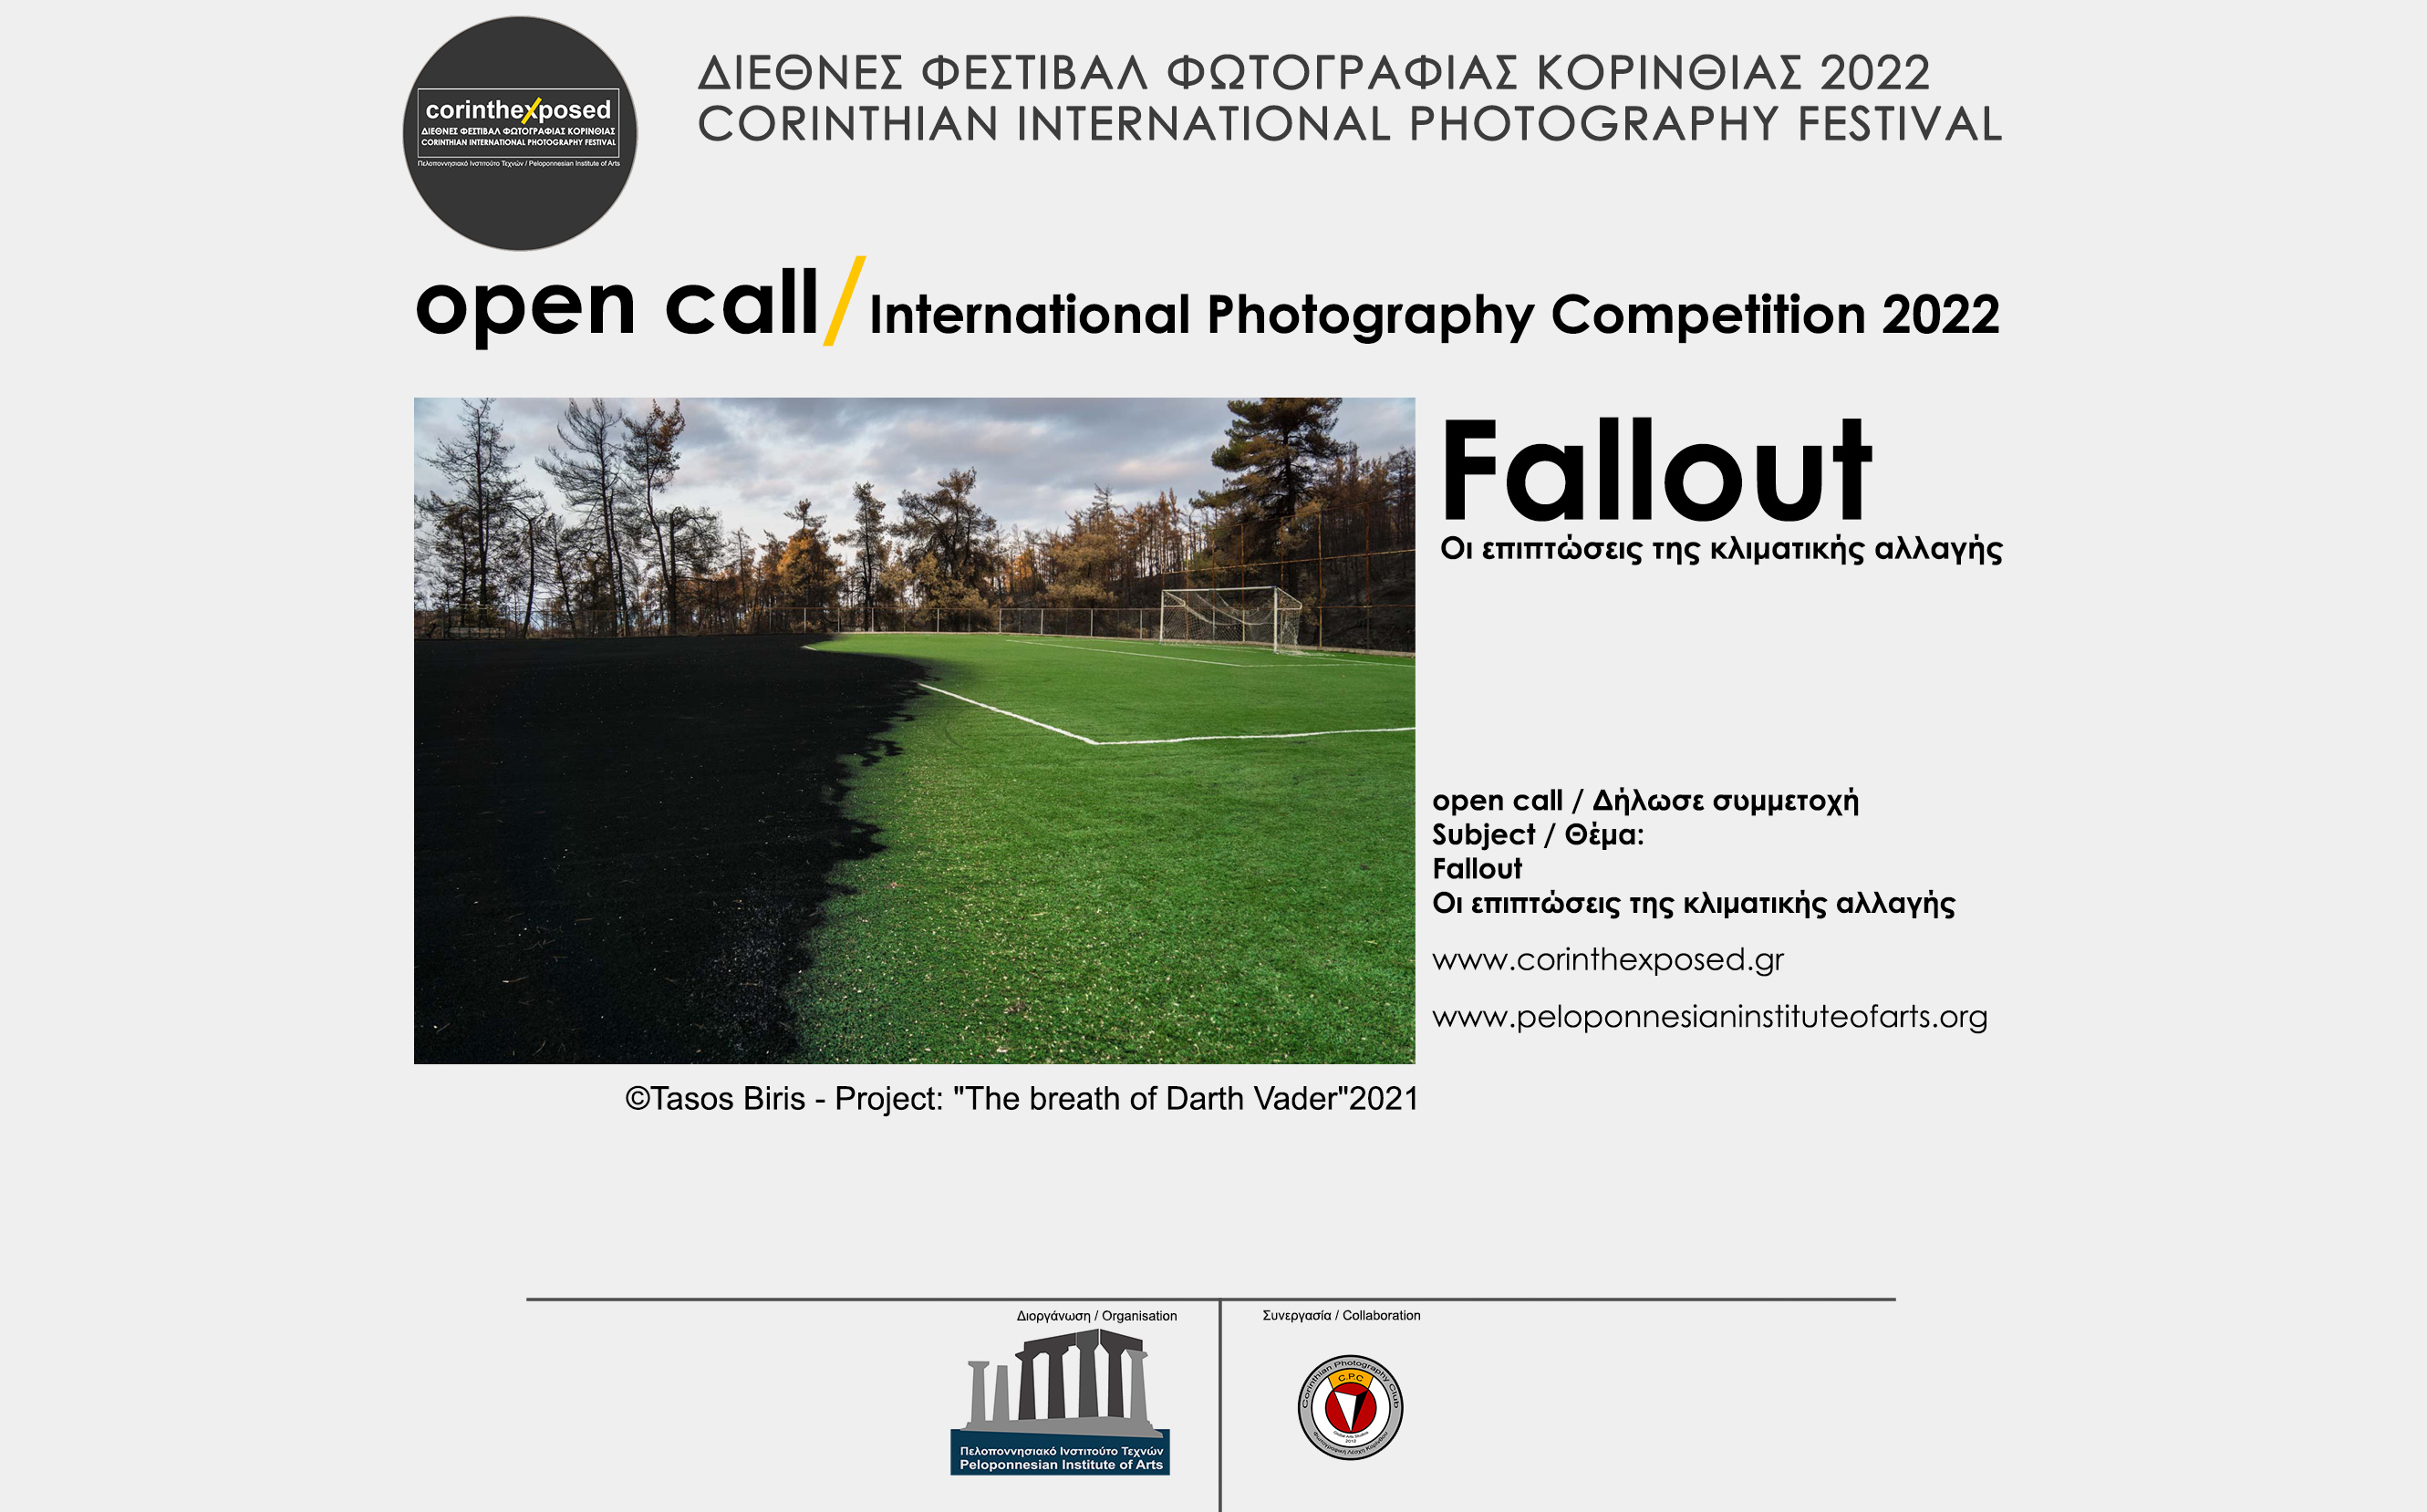 Fallout Competition 2022 - Open Call - Terms and Conditions